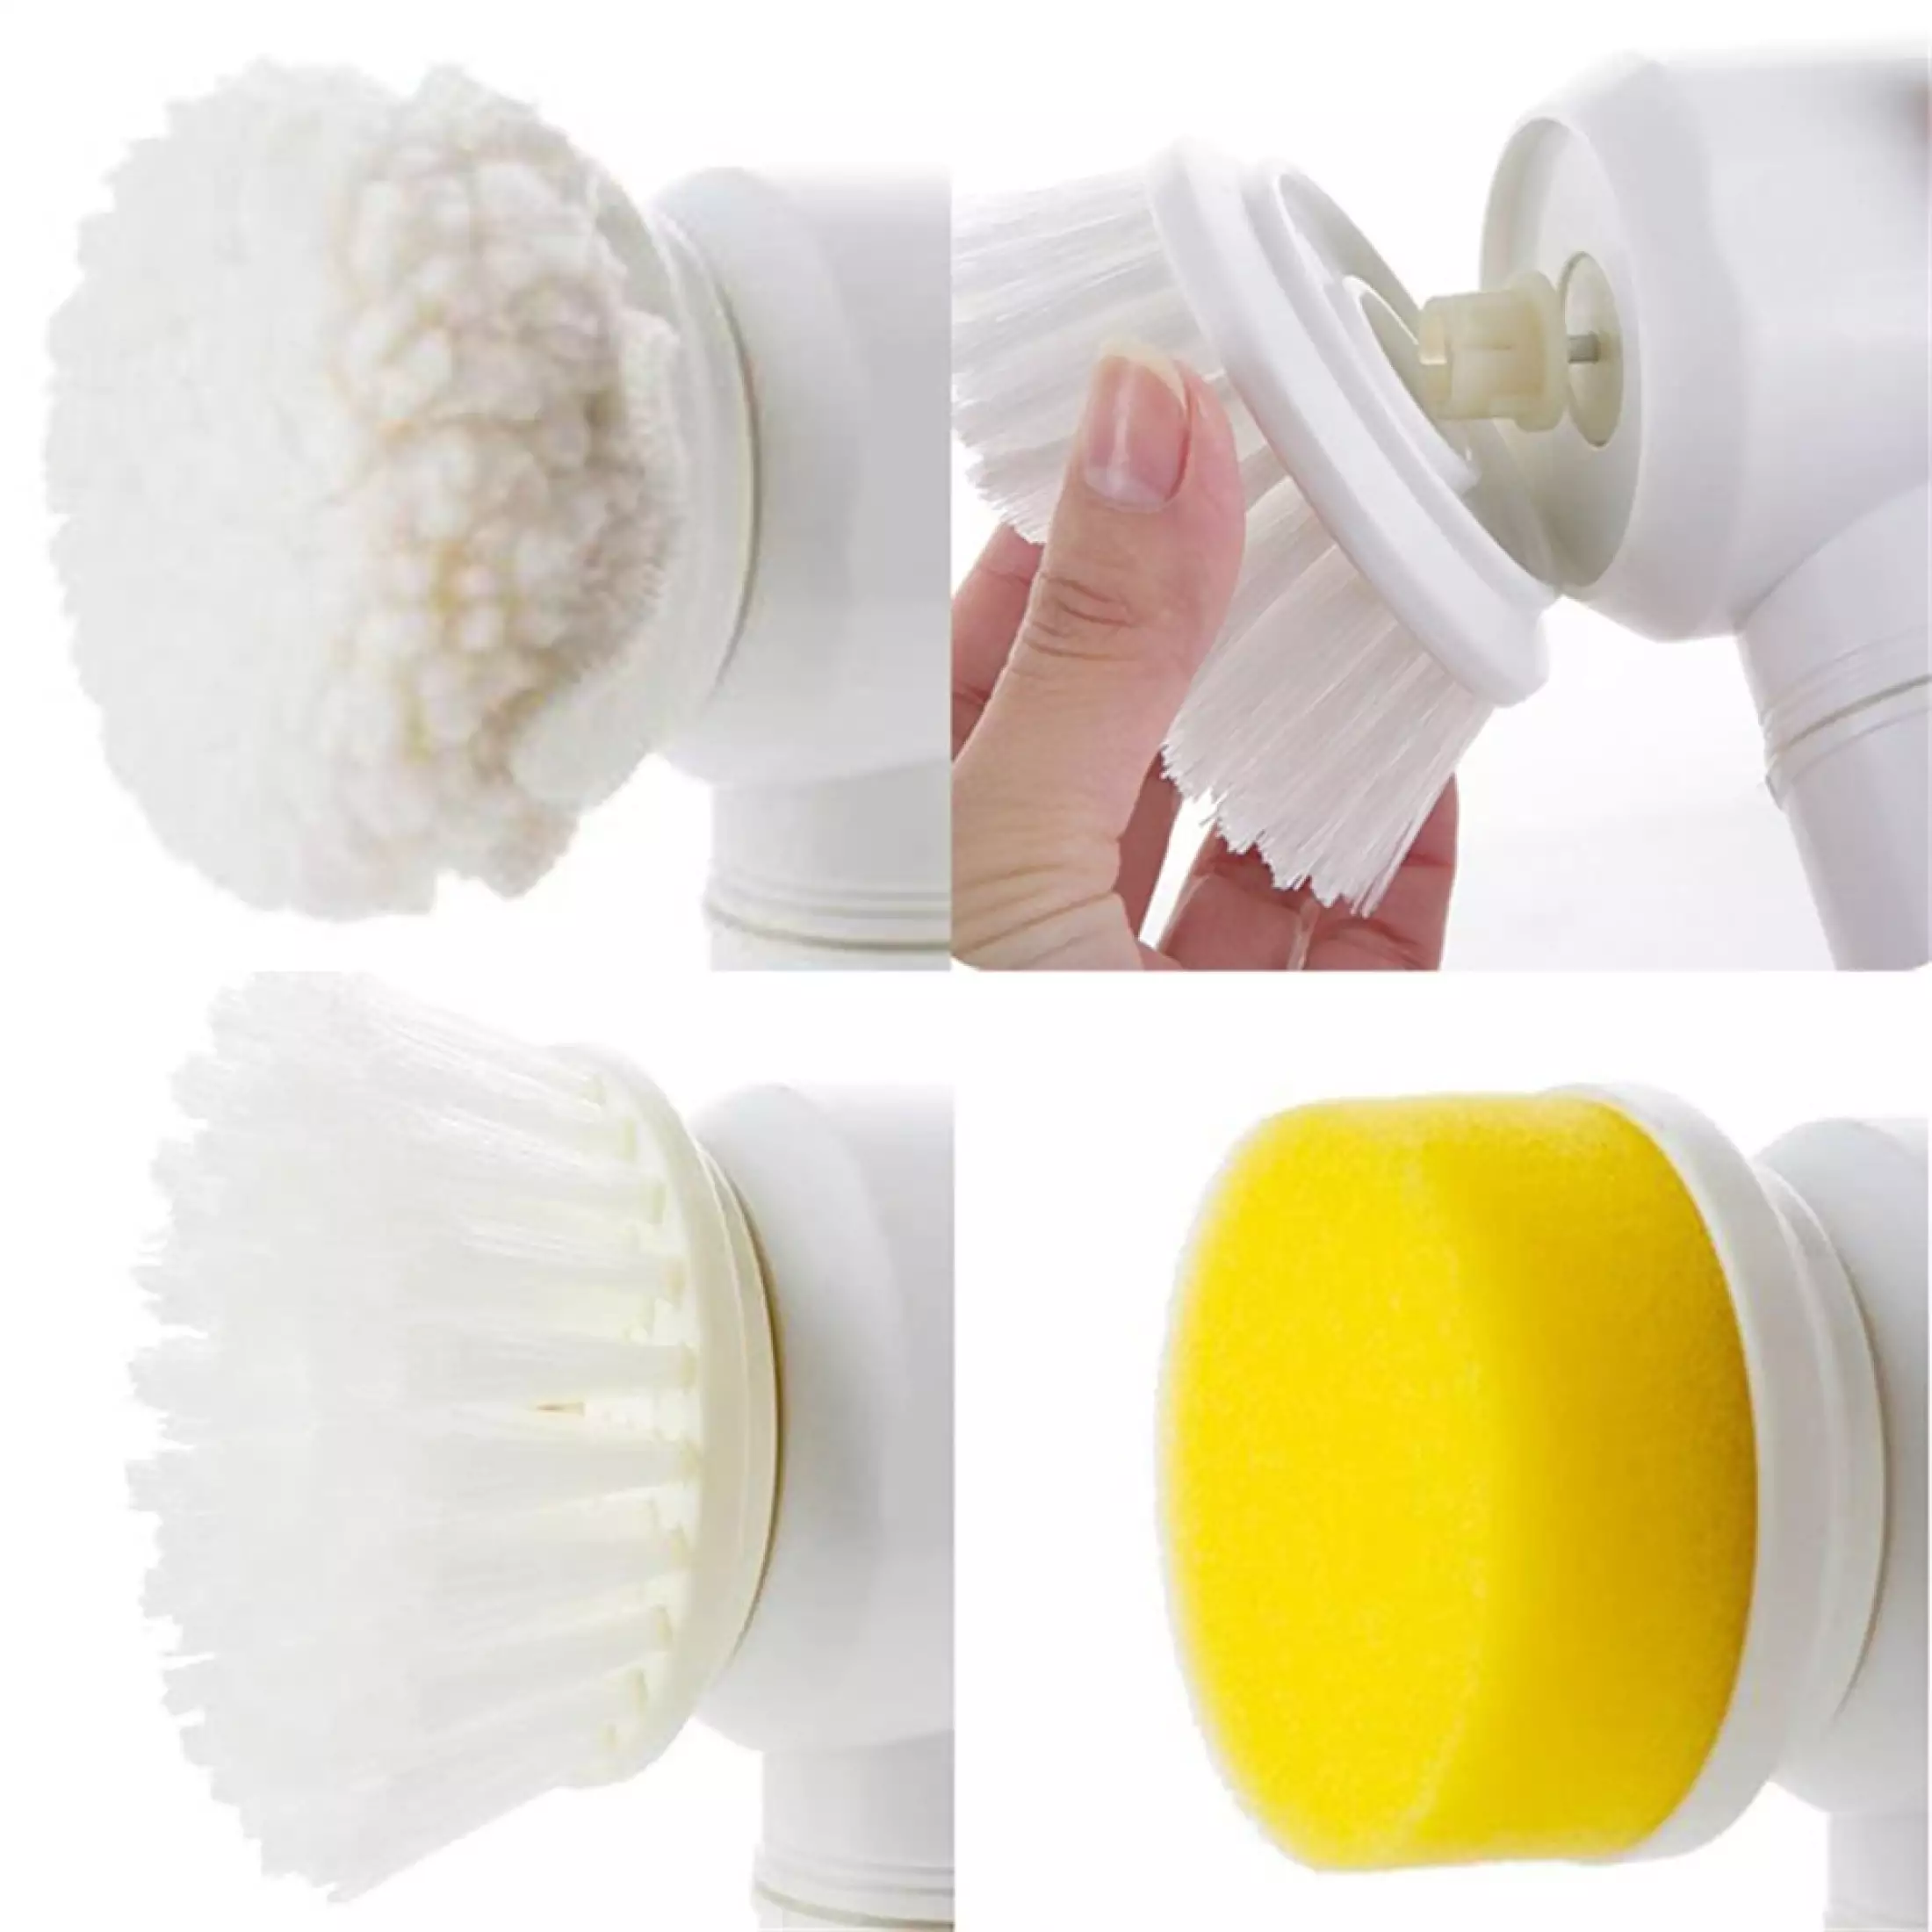 **(Net)** 5 In 1 Multifunctional Electric Magic Cleaning Brush / 100988 / KC23-270 / KN-295